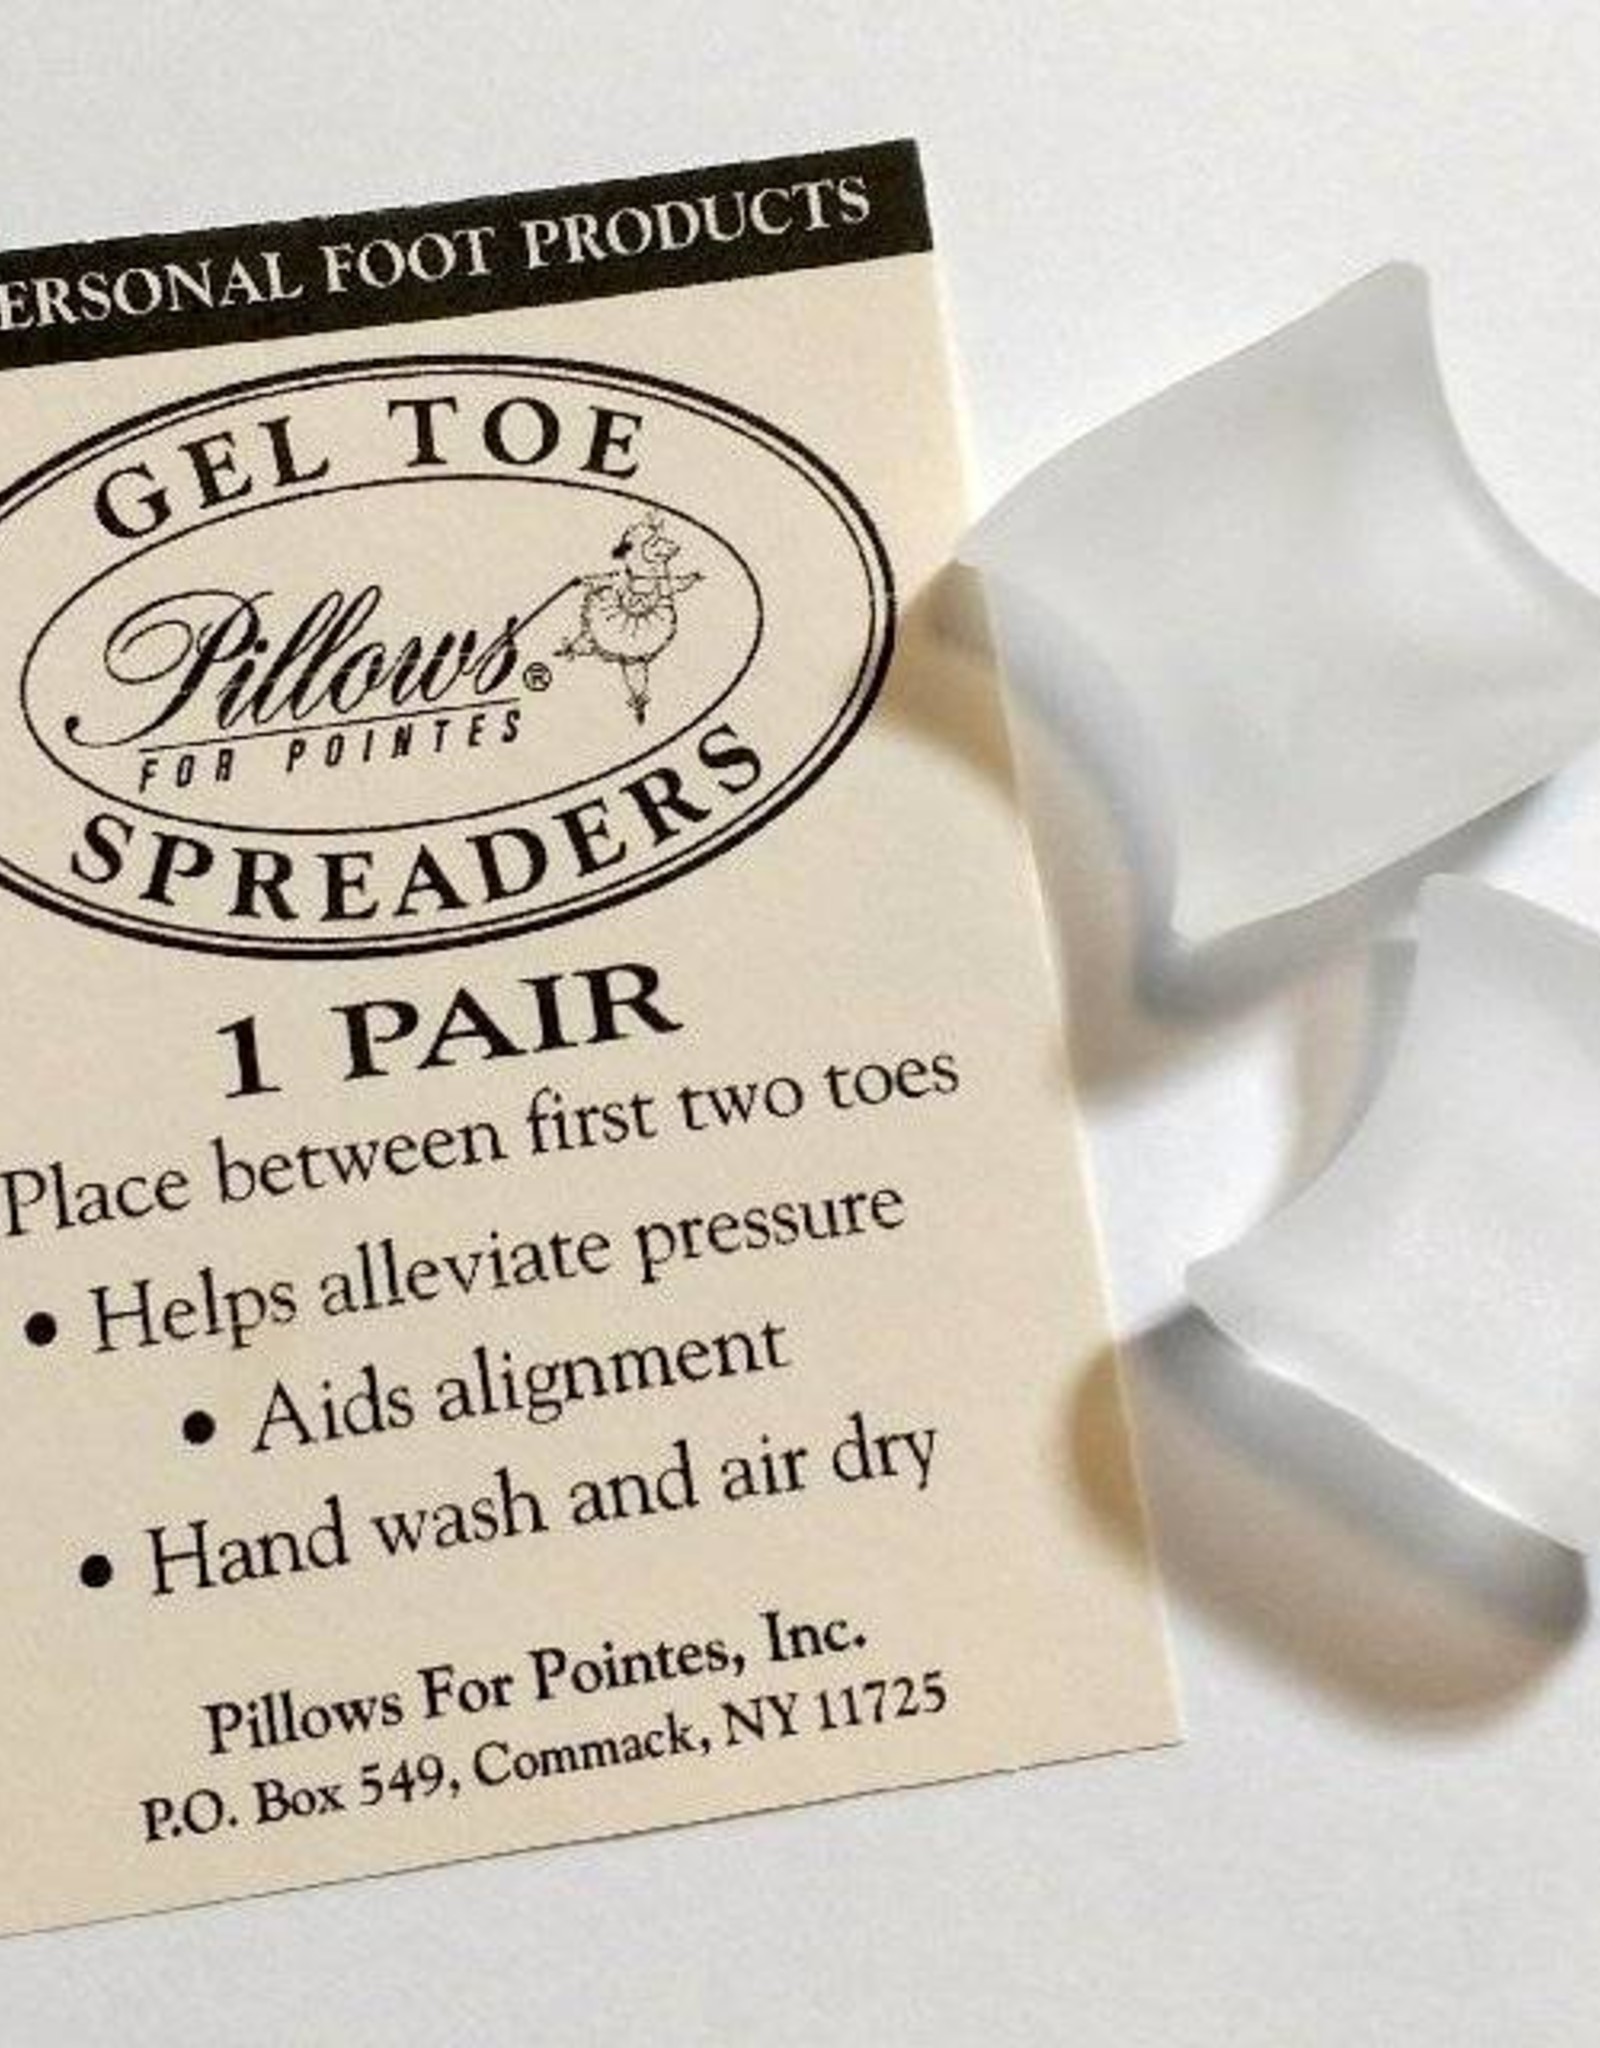 Pillows for Pointes Pillows for Pointes Gel Toe Spreaders